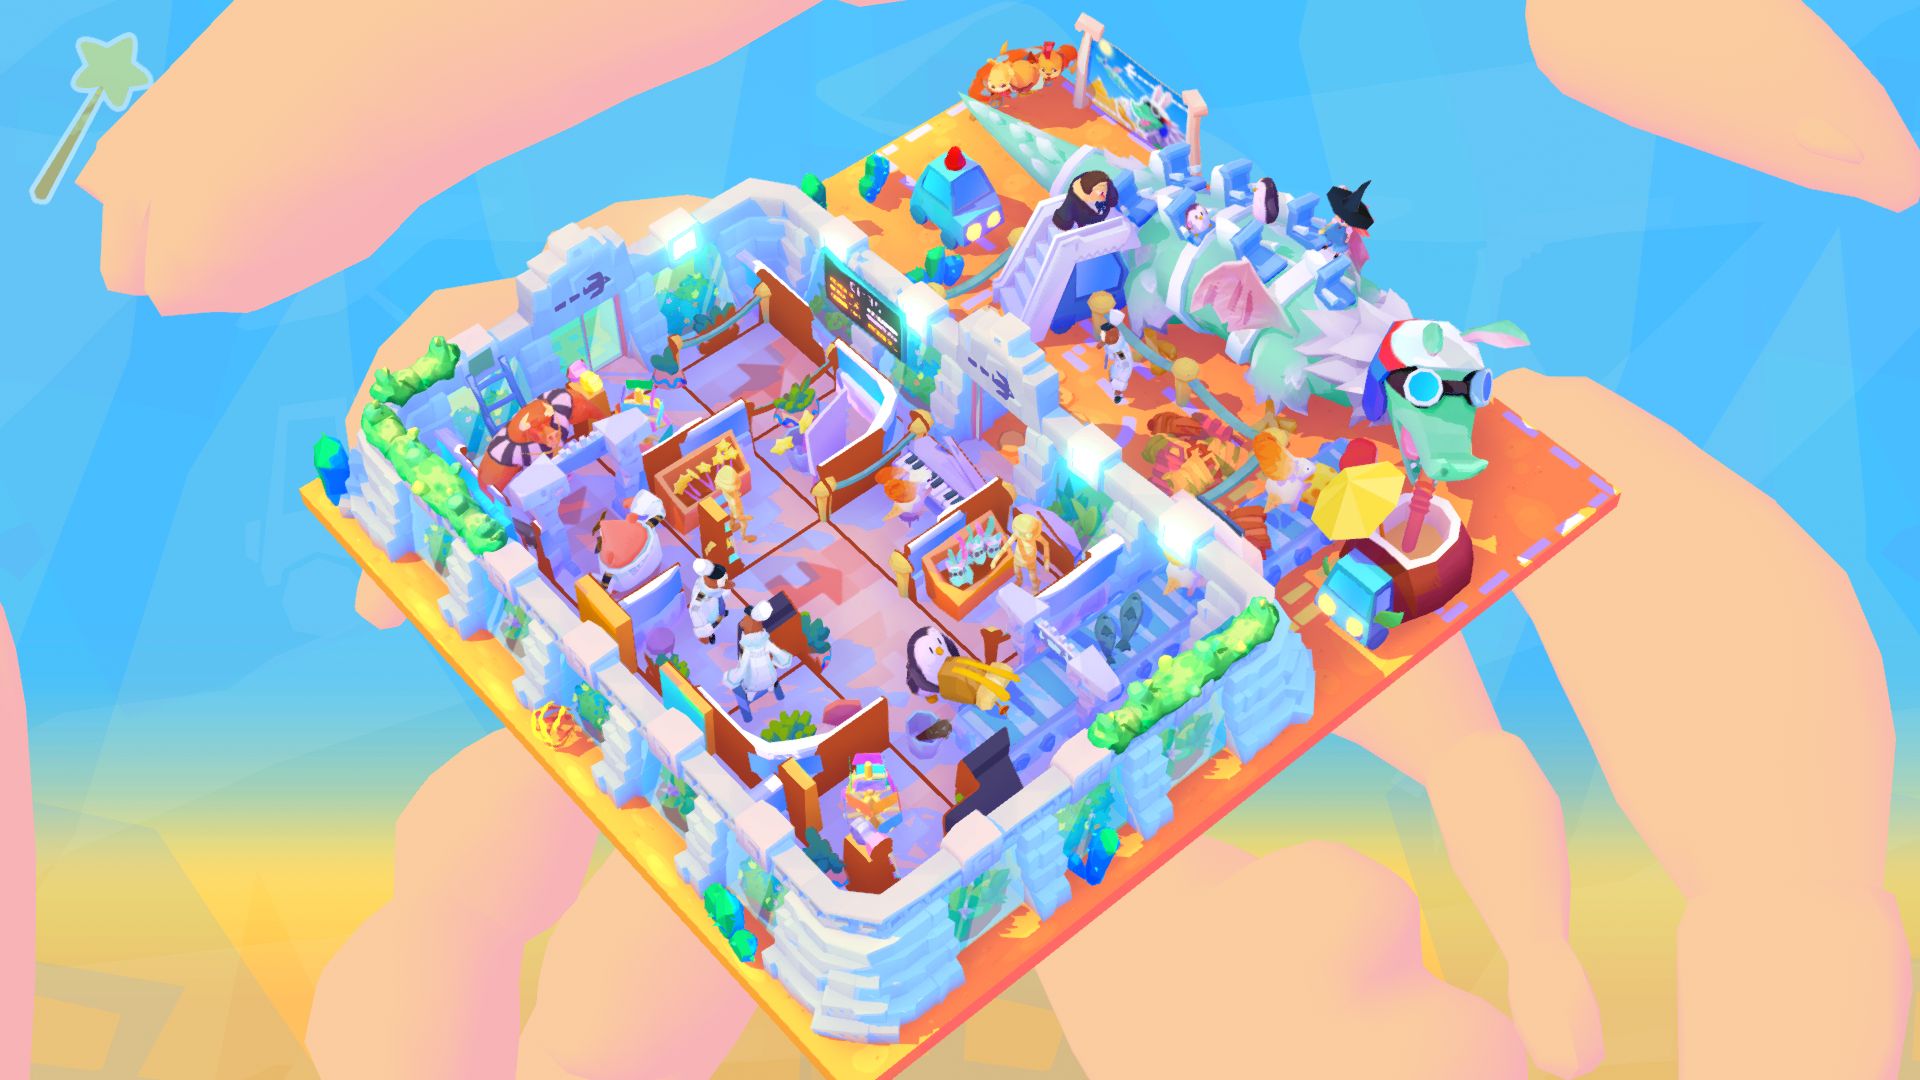 A half completed puzzle in Harmony's Odyssey of a 3D diorama of a fantasy airport. The plane is a blue dragon, refuelling my drinking from a giant cocktail